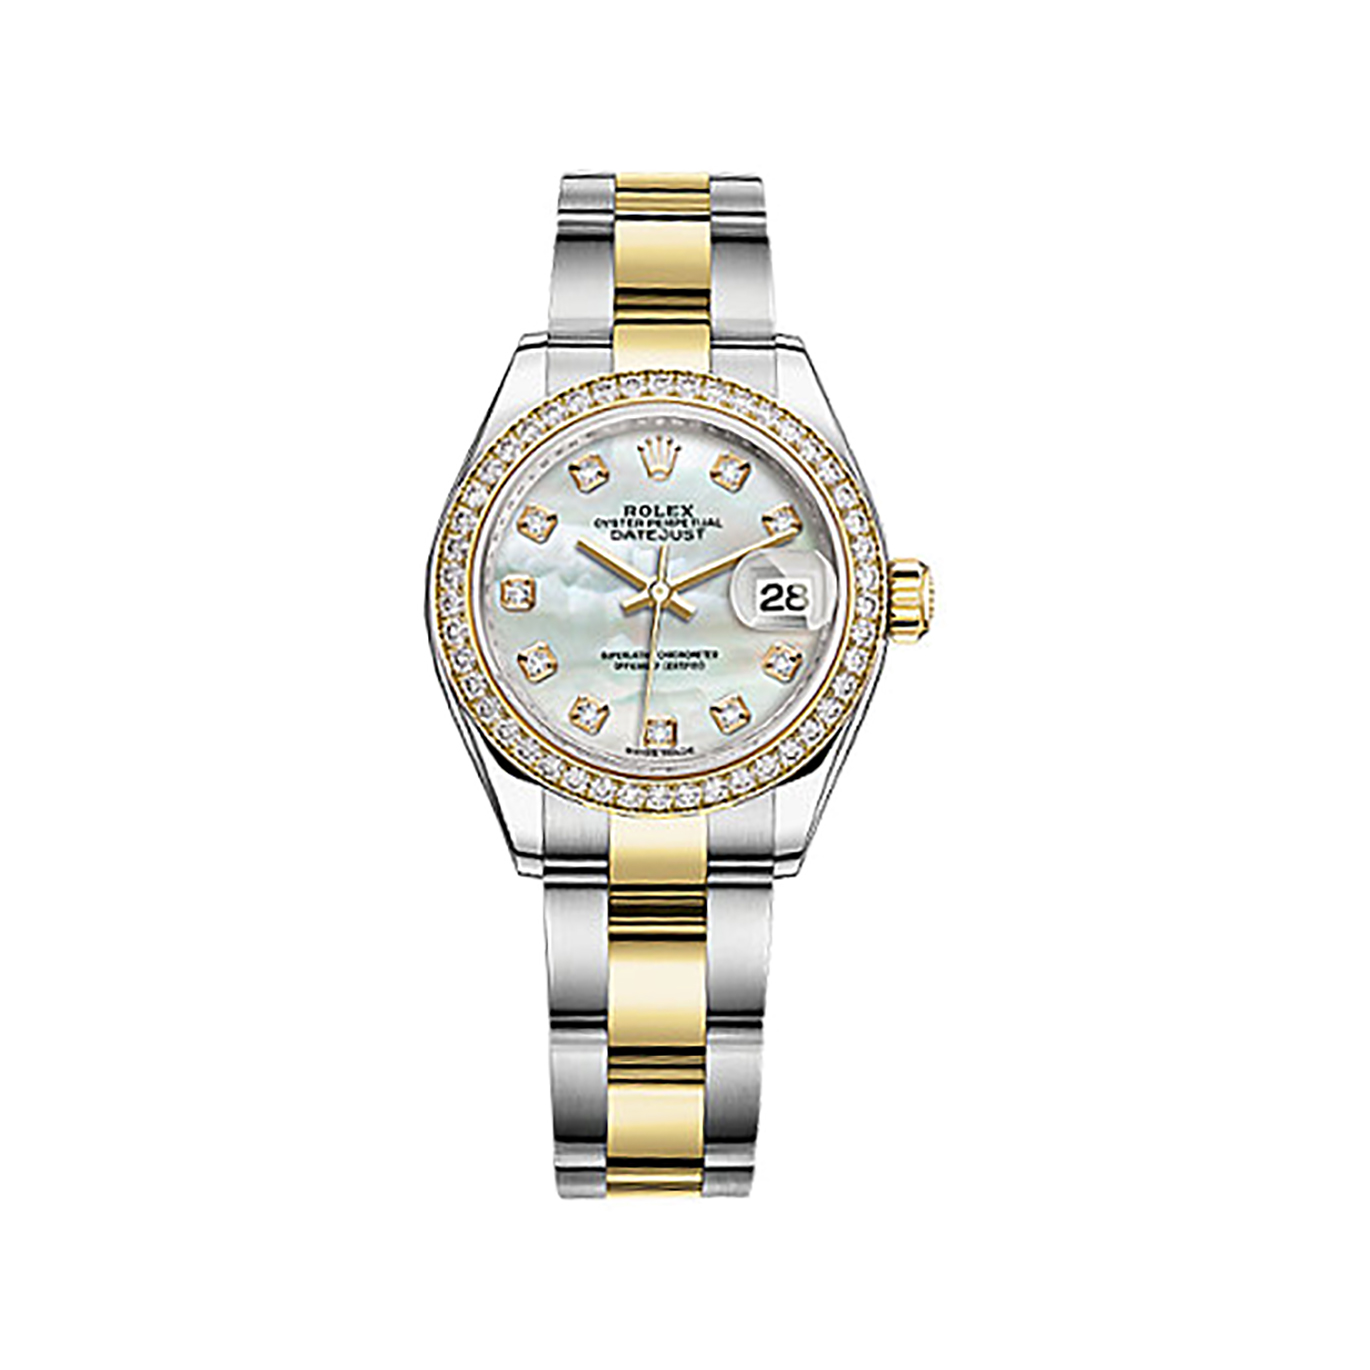 Lady-Datejust 28 279383RBR Gold & Stainless Steel & Diamonds Watch (White Mother-of-pearl Set with Diamonds)